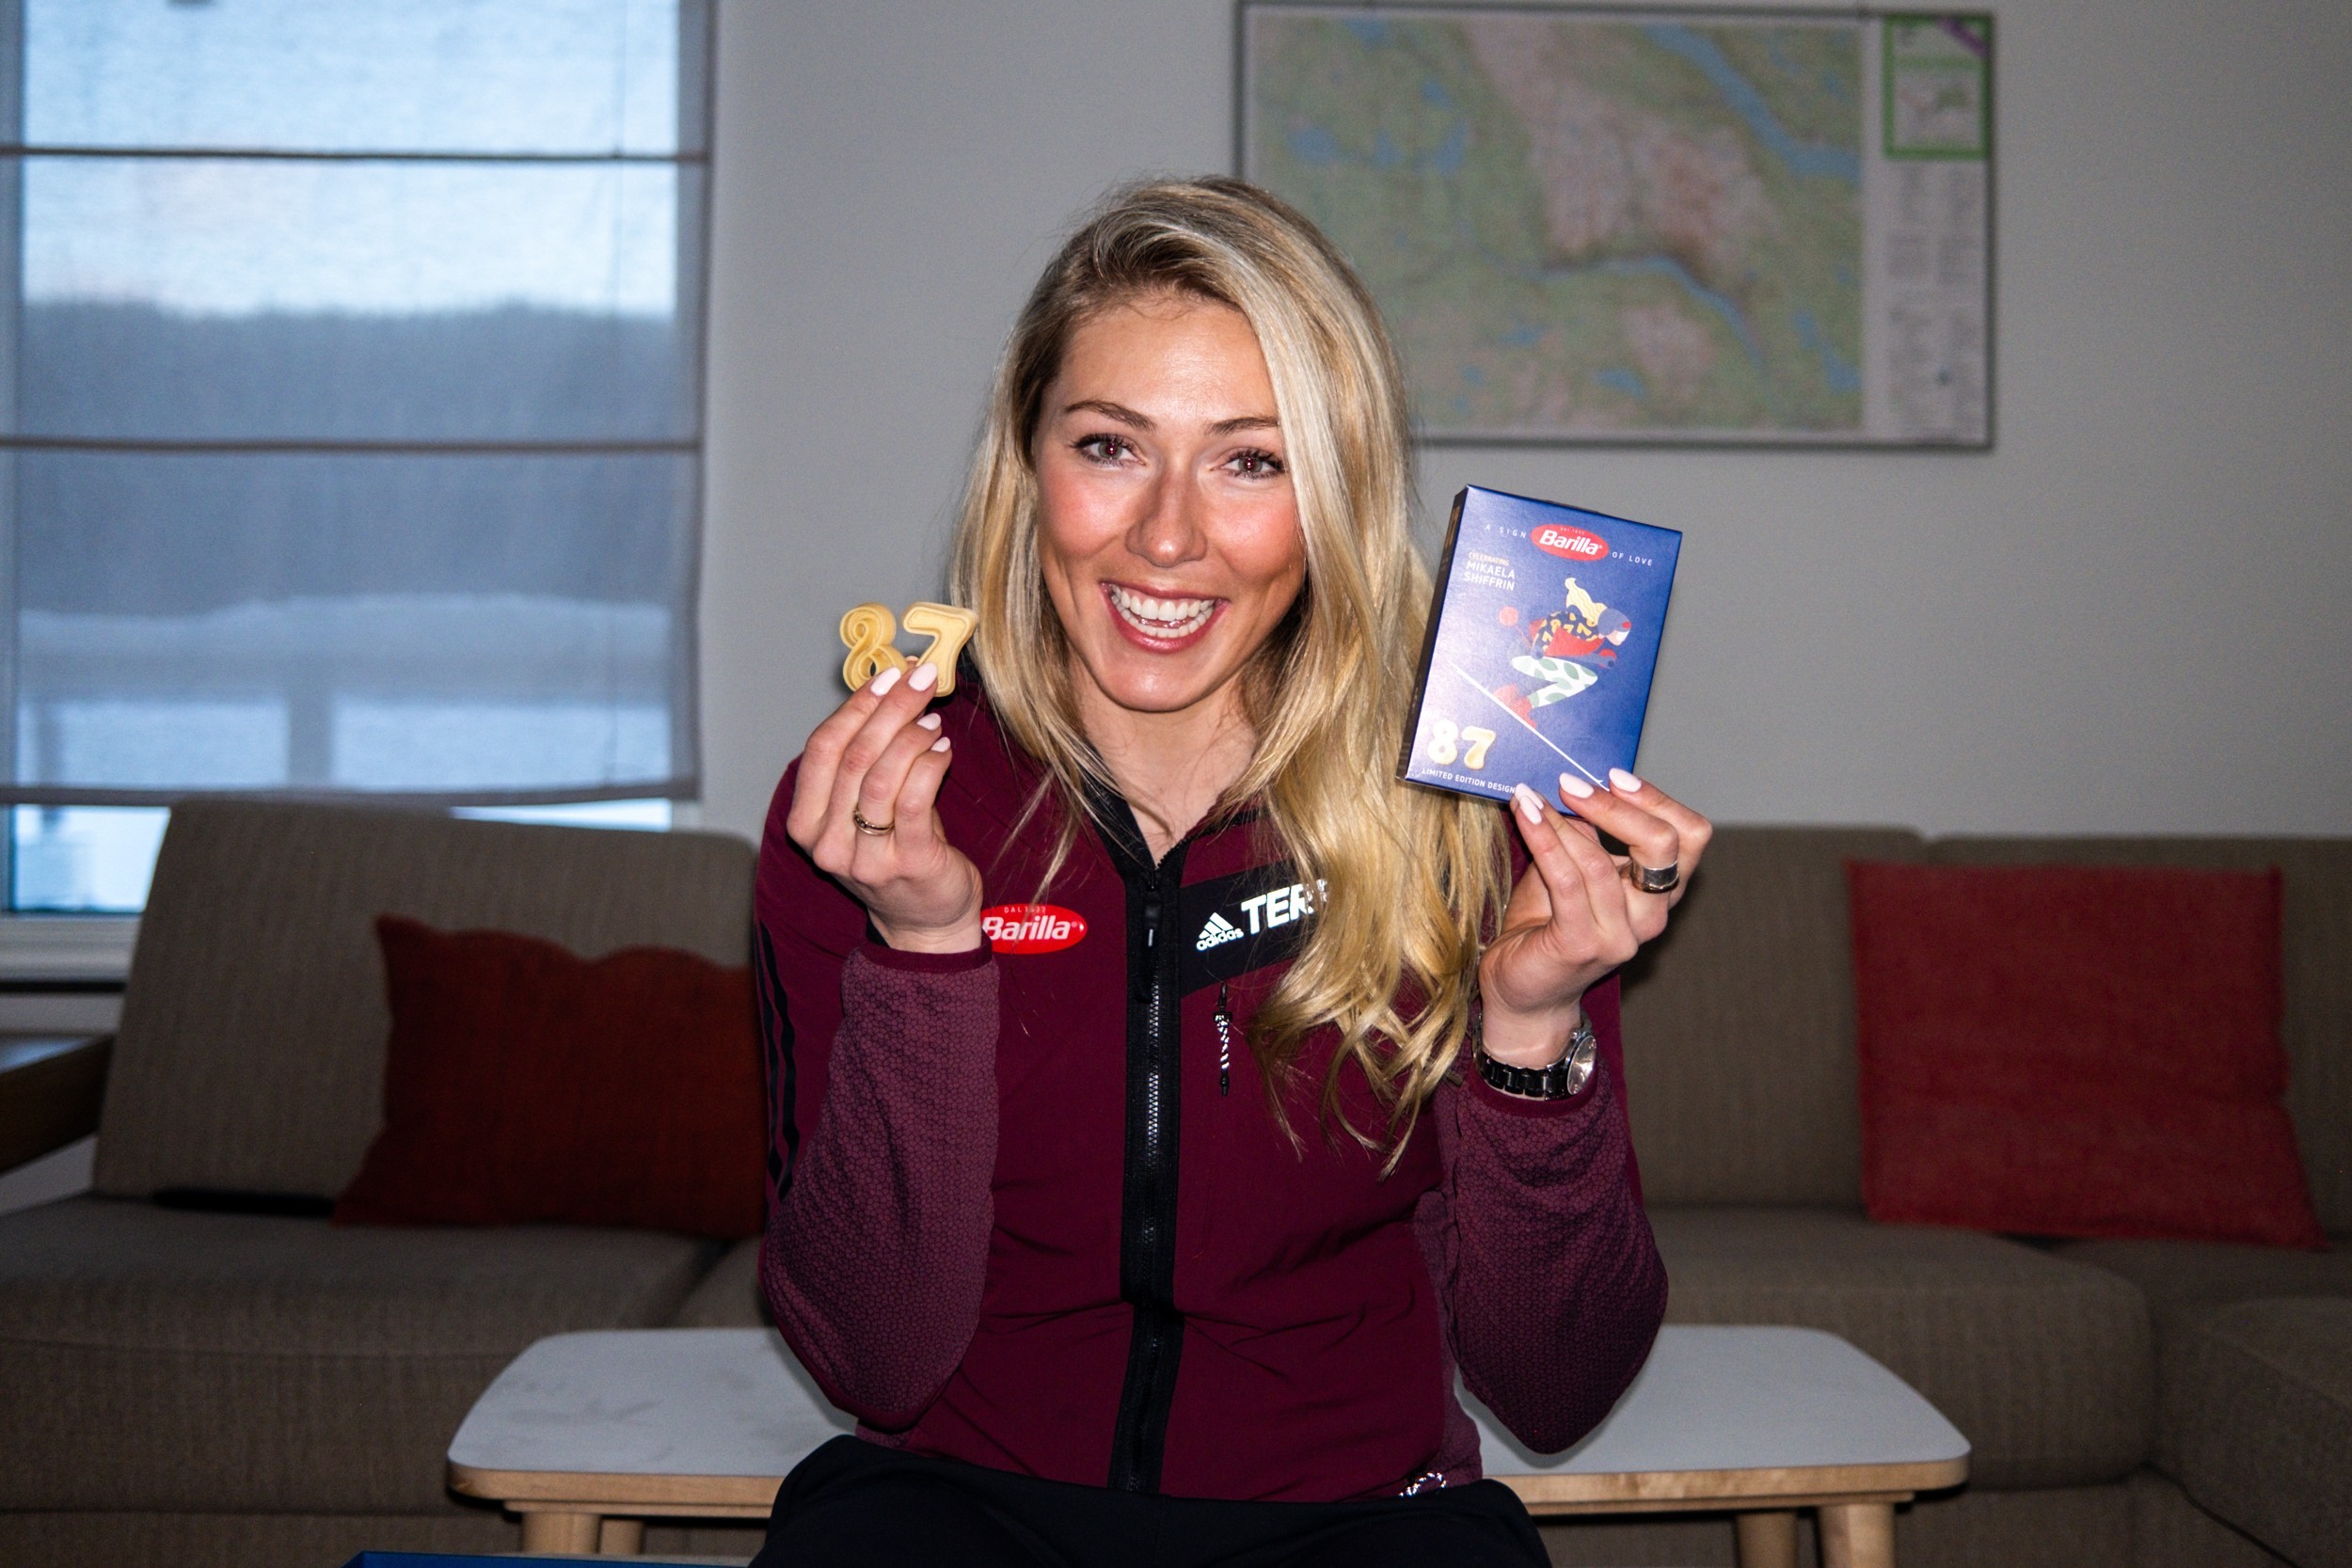 Barilla & Mikaela Shiffrin: Greatness starts with a great recipe - Pack No. 34